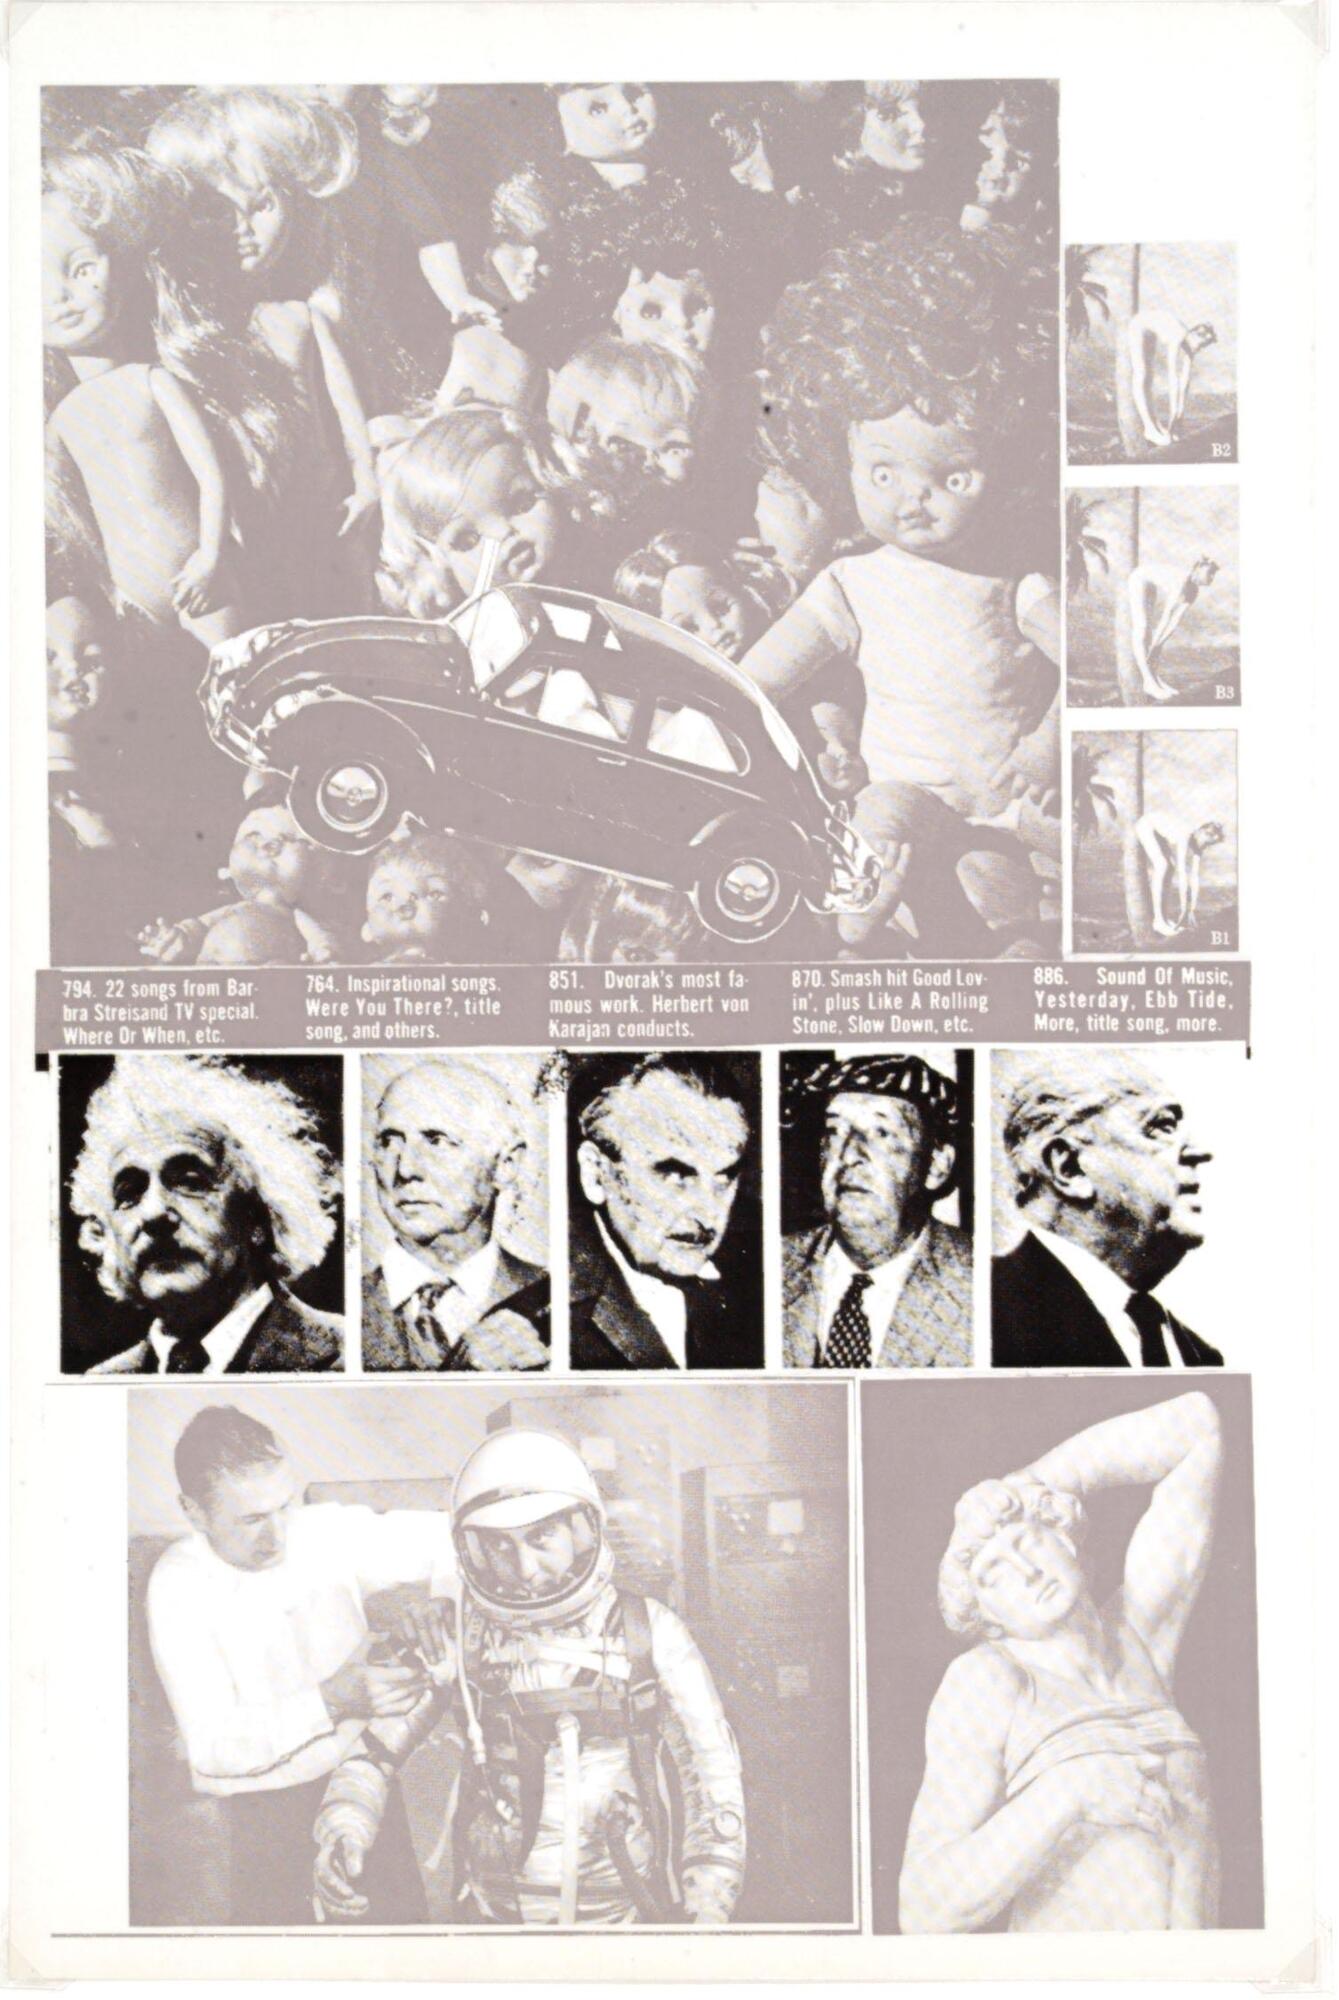 This screenprint is in grey and black on white background. There are a variety of images and text collaged together, in three main sections. At the top, in grey, there is one large image of a group of naked toy dolls with a Volkswagen Beatle collaged over top and to the right, three smaller identical images of a man stretching against a palm tree at the beach. Below this is another section with text printed in grey and photographs of white men, including Albert Einstein on the far left, printed in black. The bottom register has two images printed in grey. On the left, there is an image of a man helping another man into a space suit with computers in the background; on the right, there is a detail of on of Michelangelo's<em> ​Dying Slave </em>(ca. 1513).